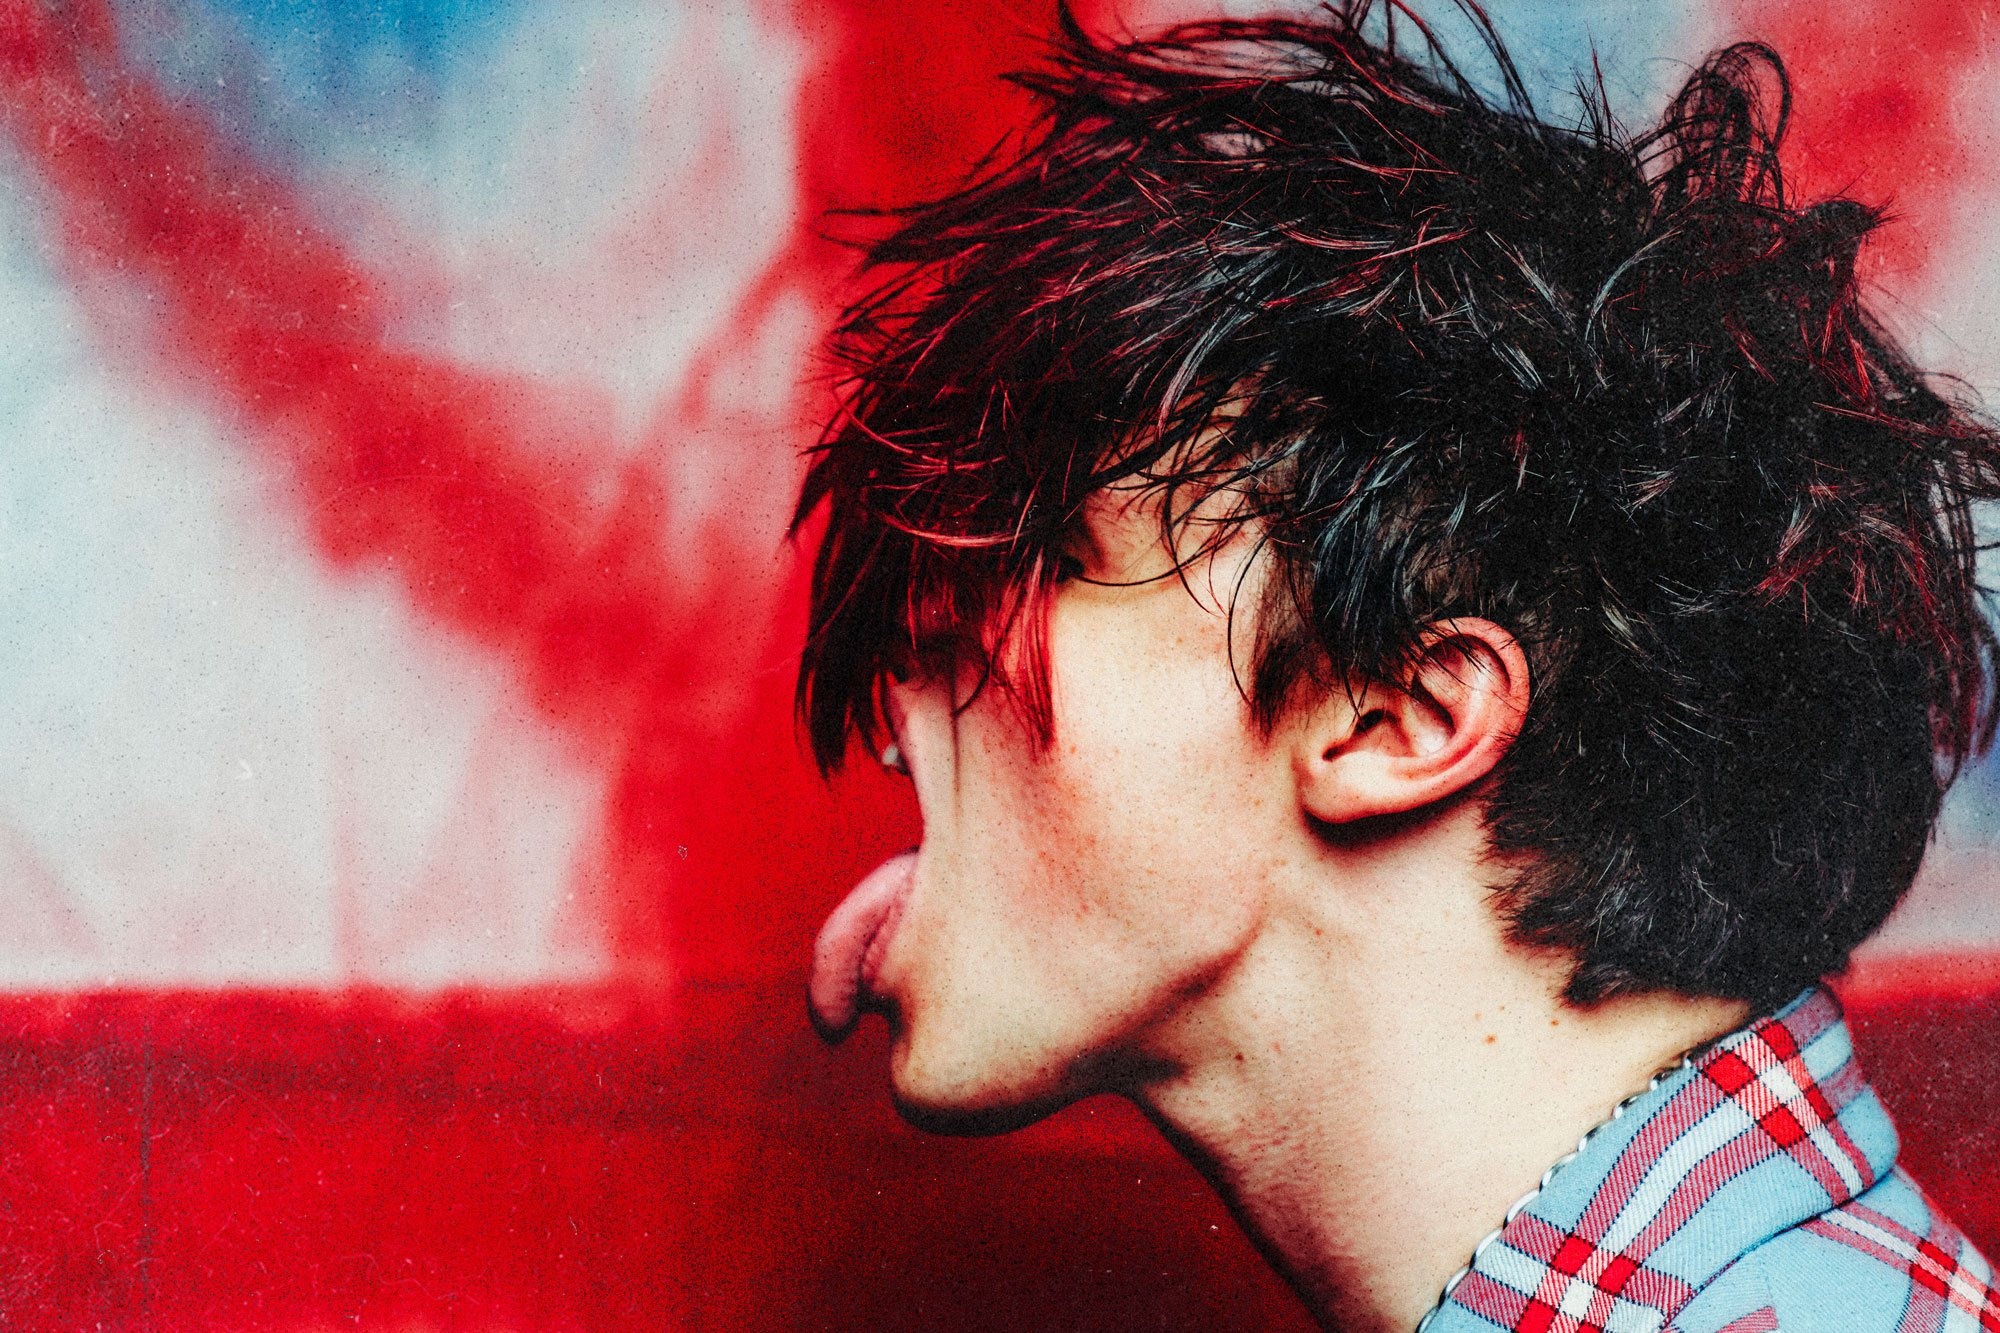 Yungblud Music, Rebellion of the young, Alternative icon, Fresh music perspective, 2000x1340 HD Desktop